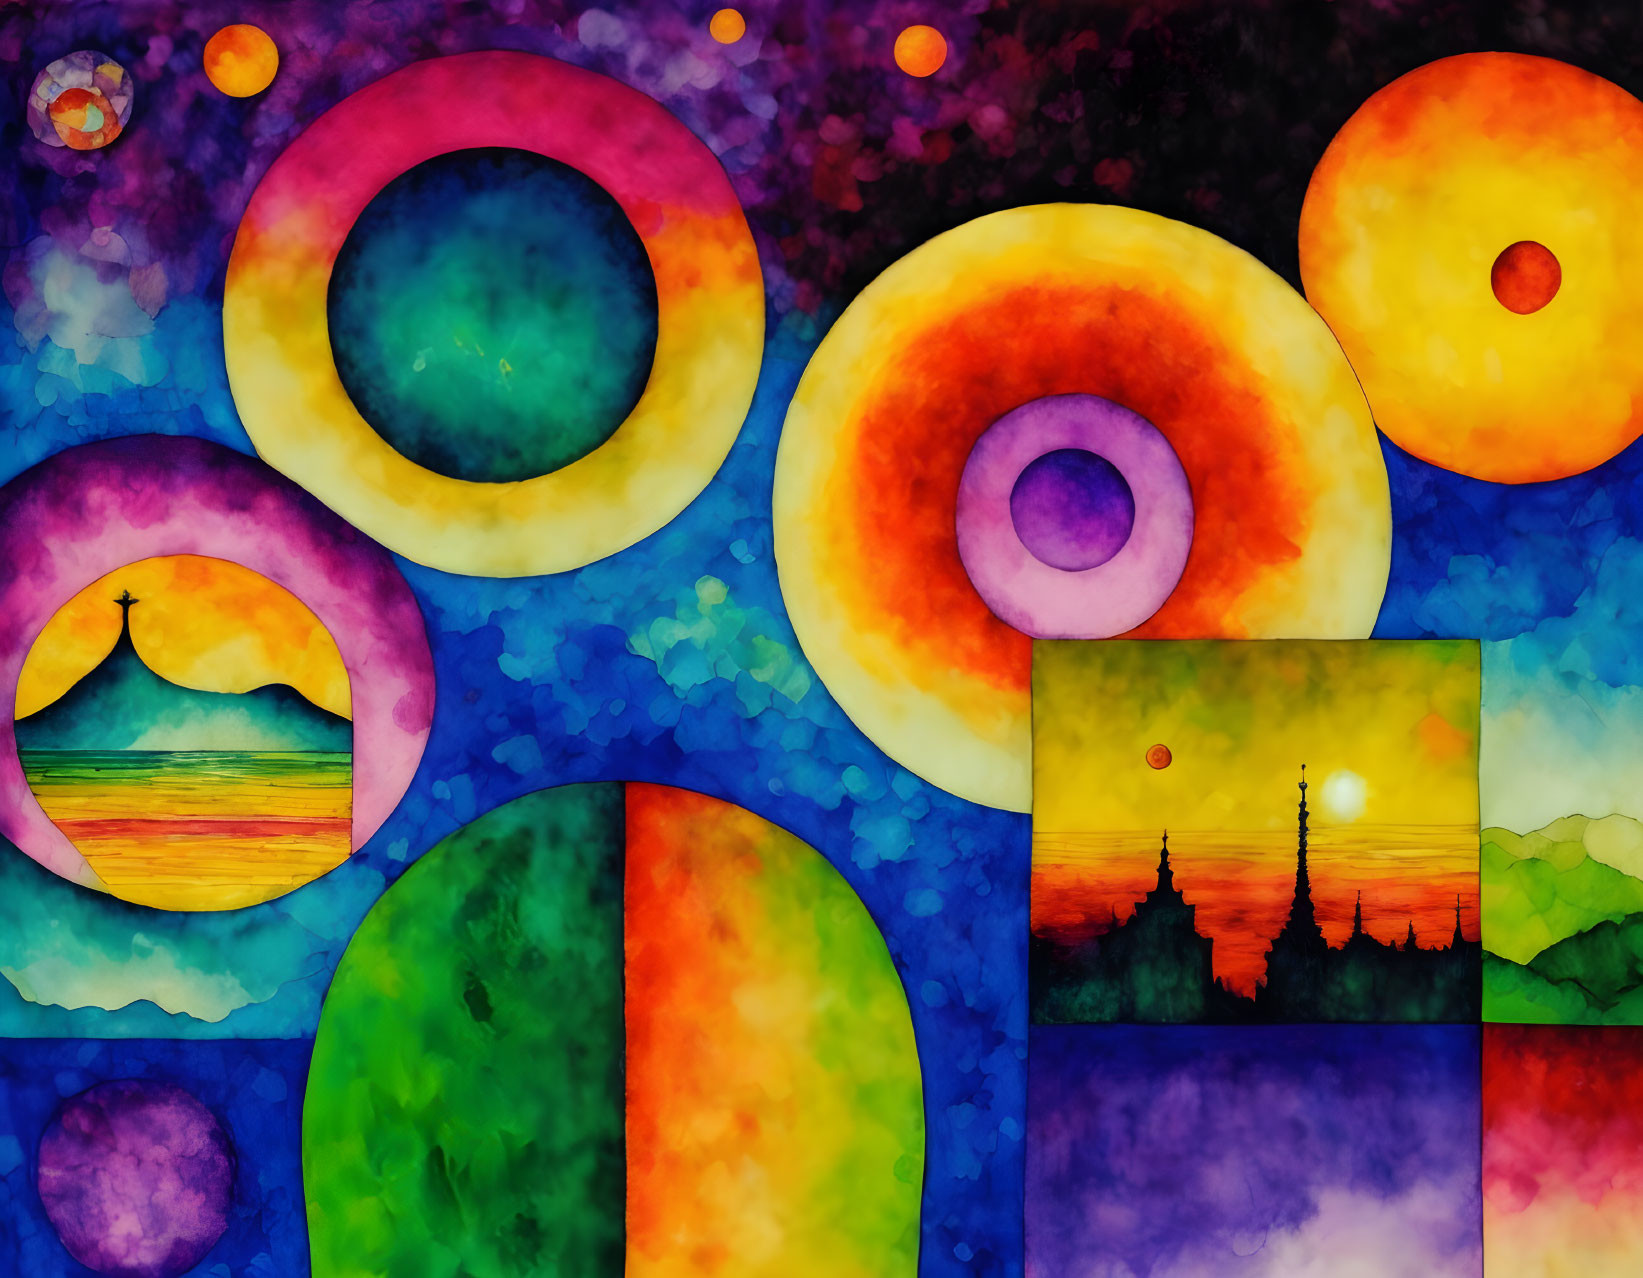 Colorful Abstract Watercolor Painting with Vibrant Circles and Mosaic Textures